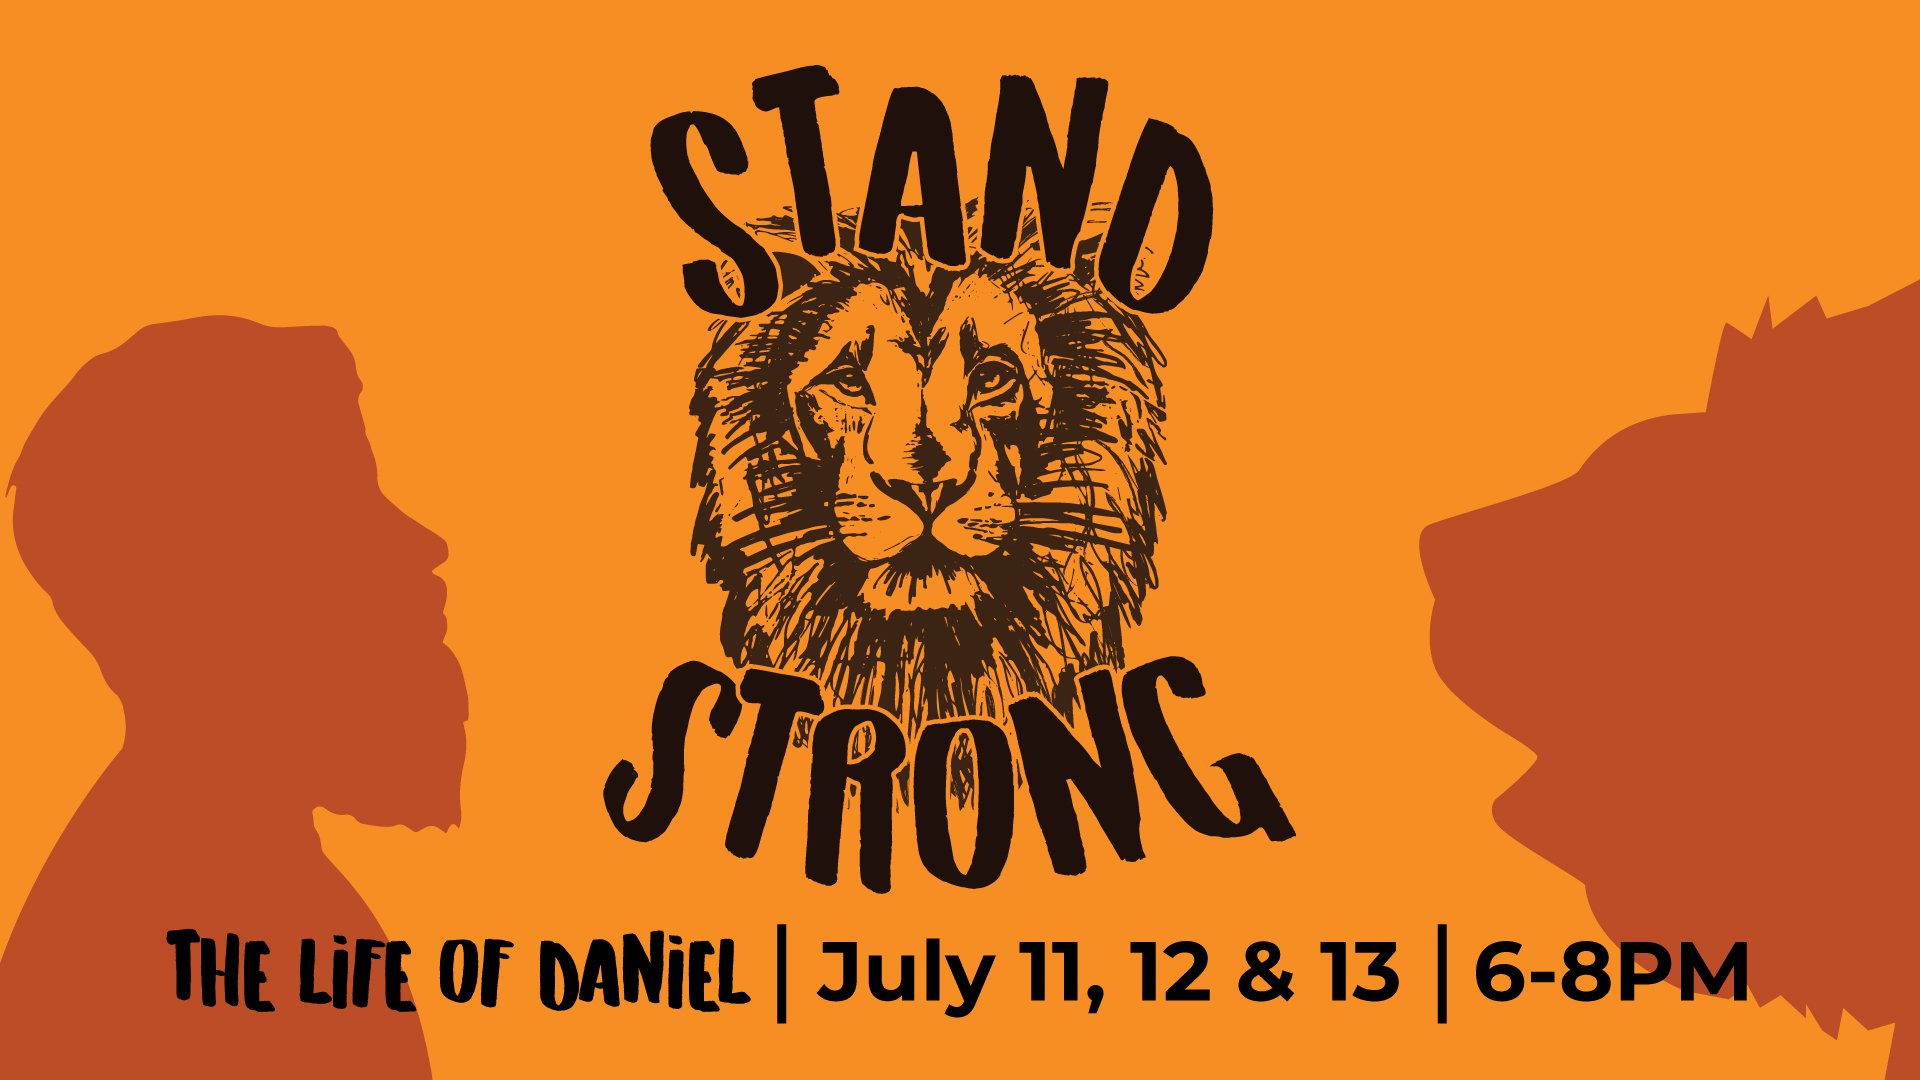 Stand Strong | The Life of Daniel | July 11, 12, & 13 | 6-8PM